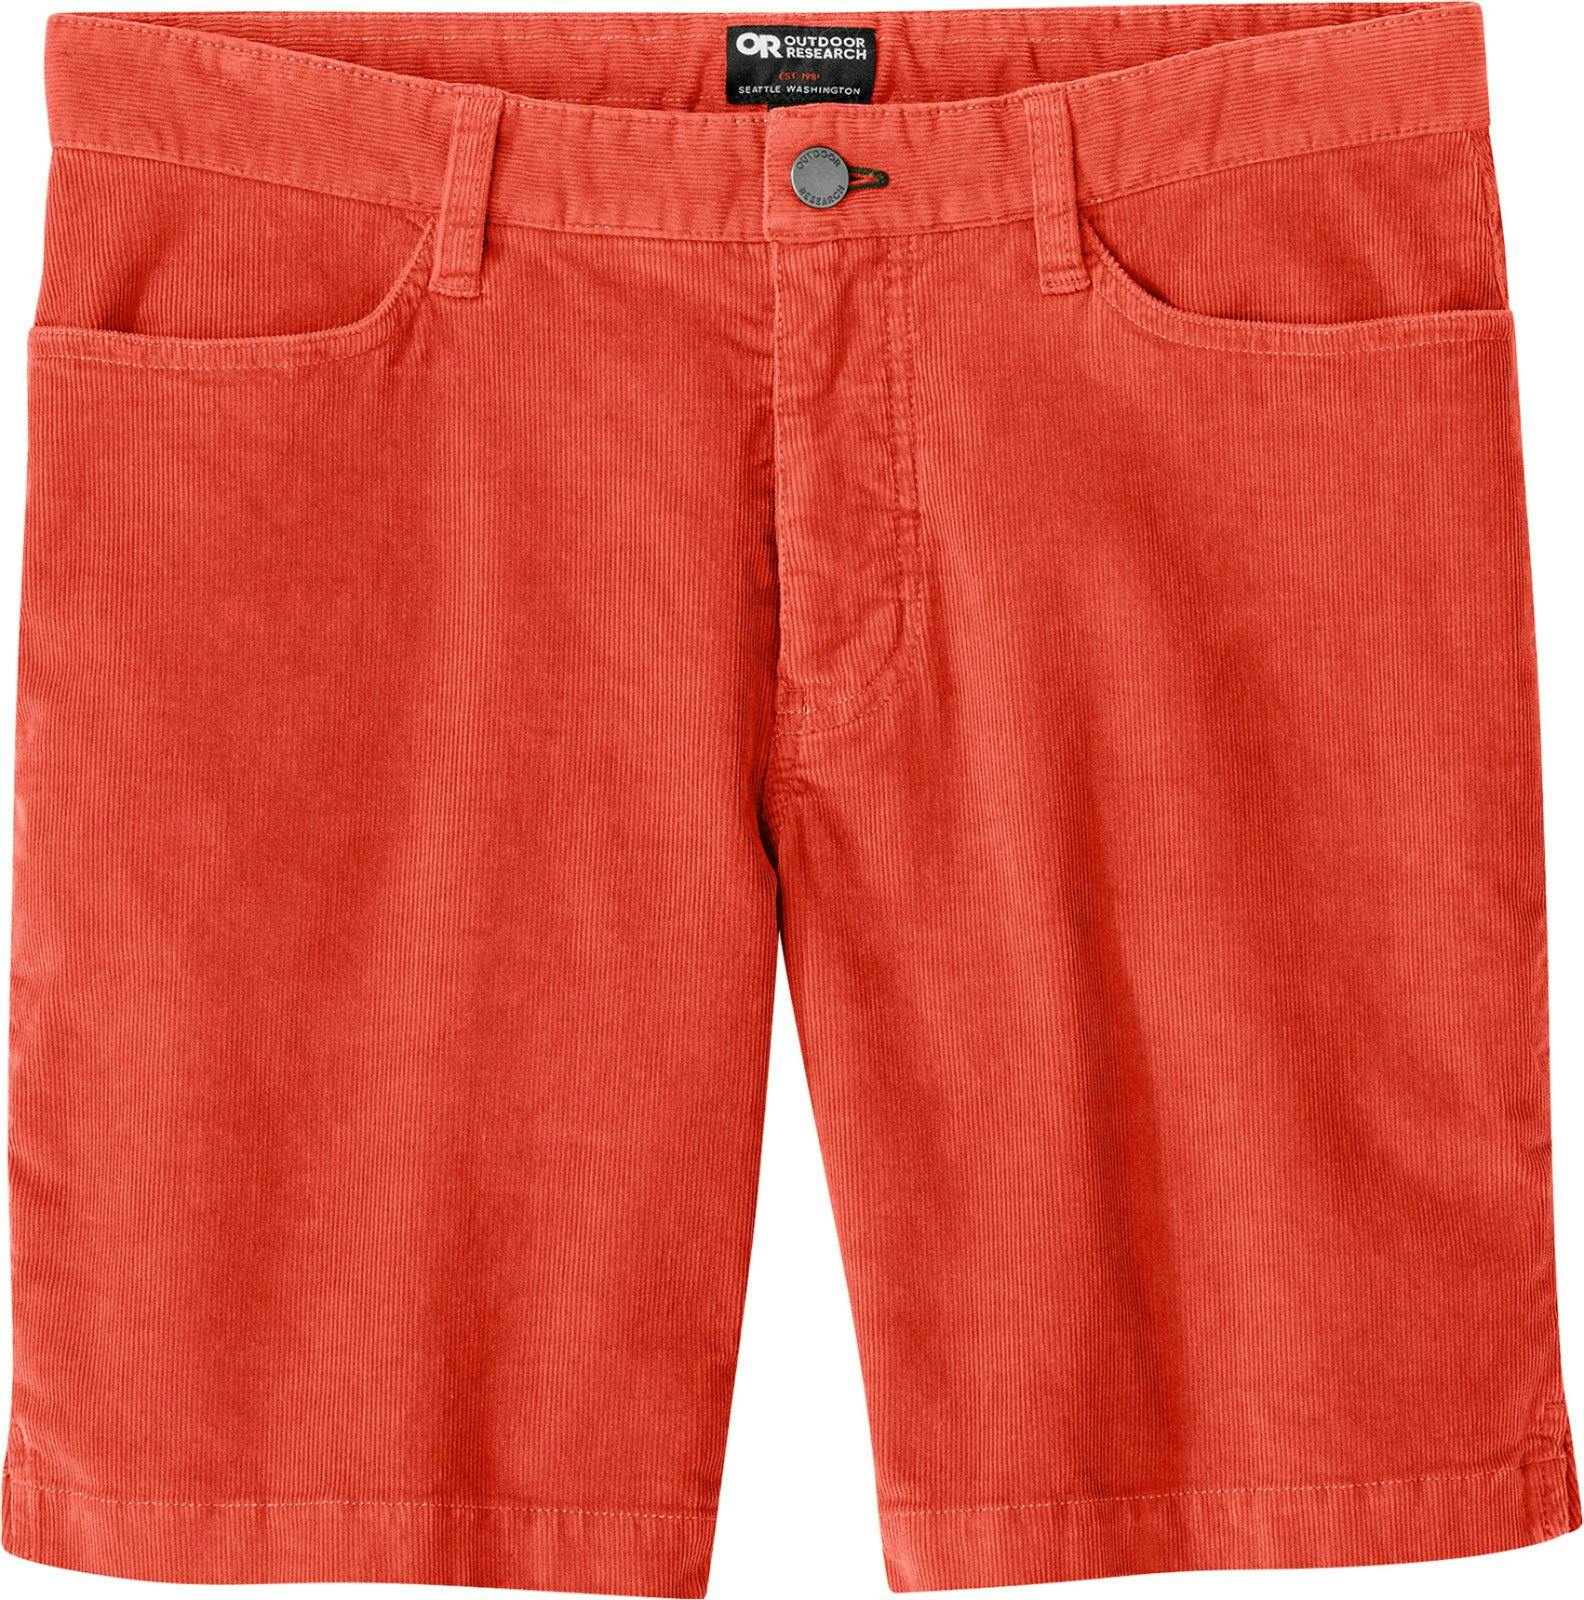 Product image for Method Cord Shorts - Men's